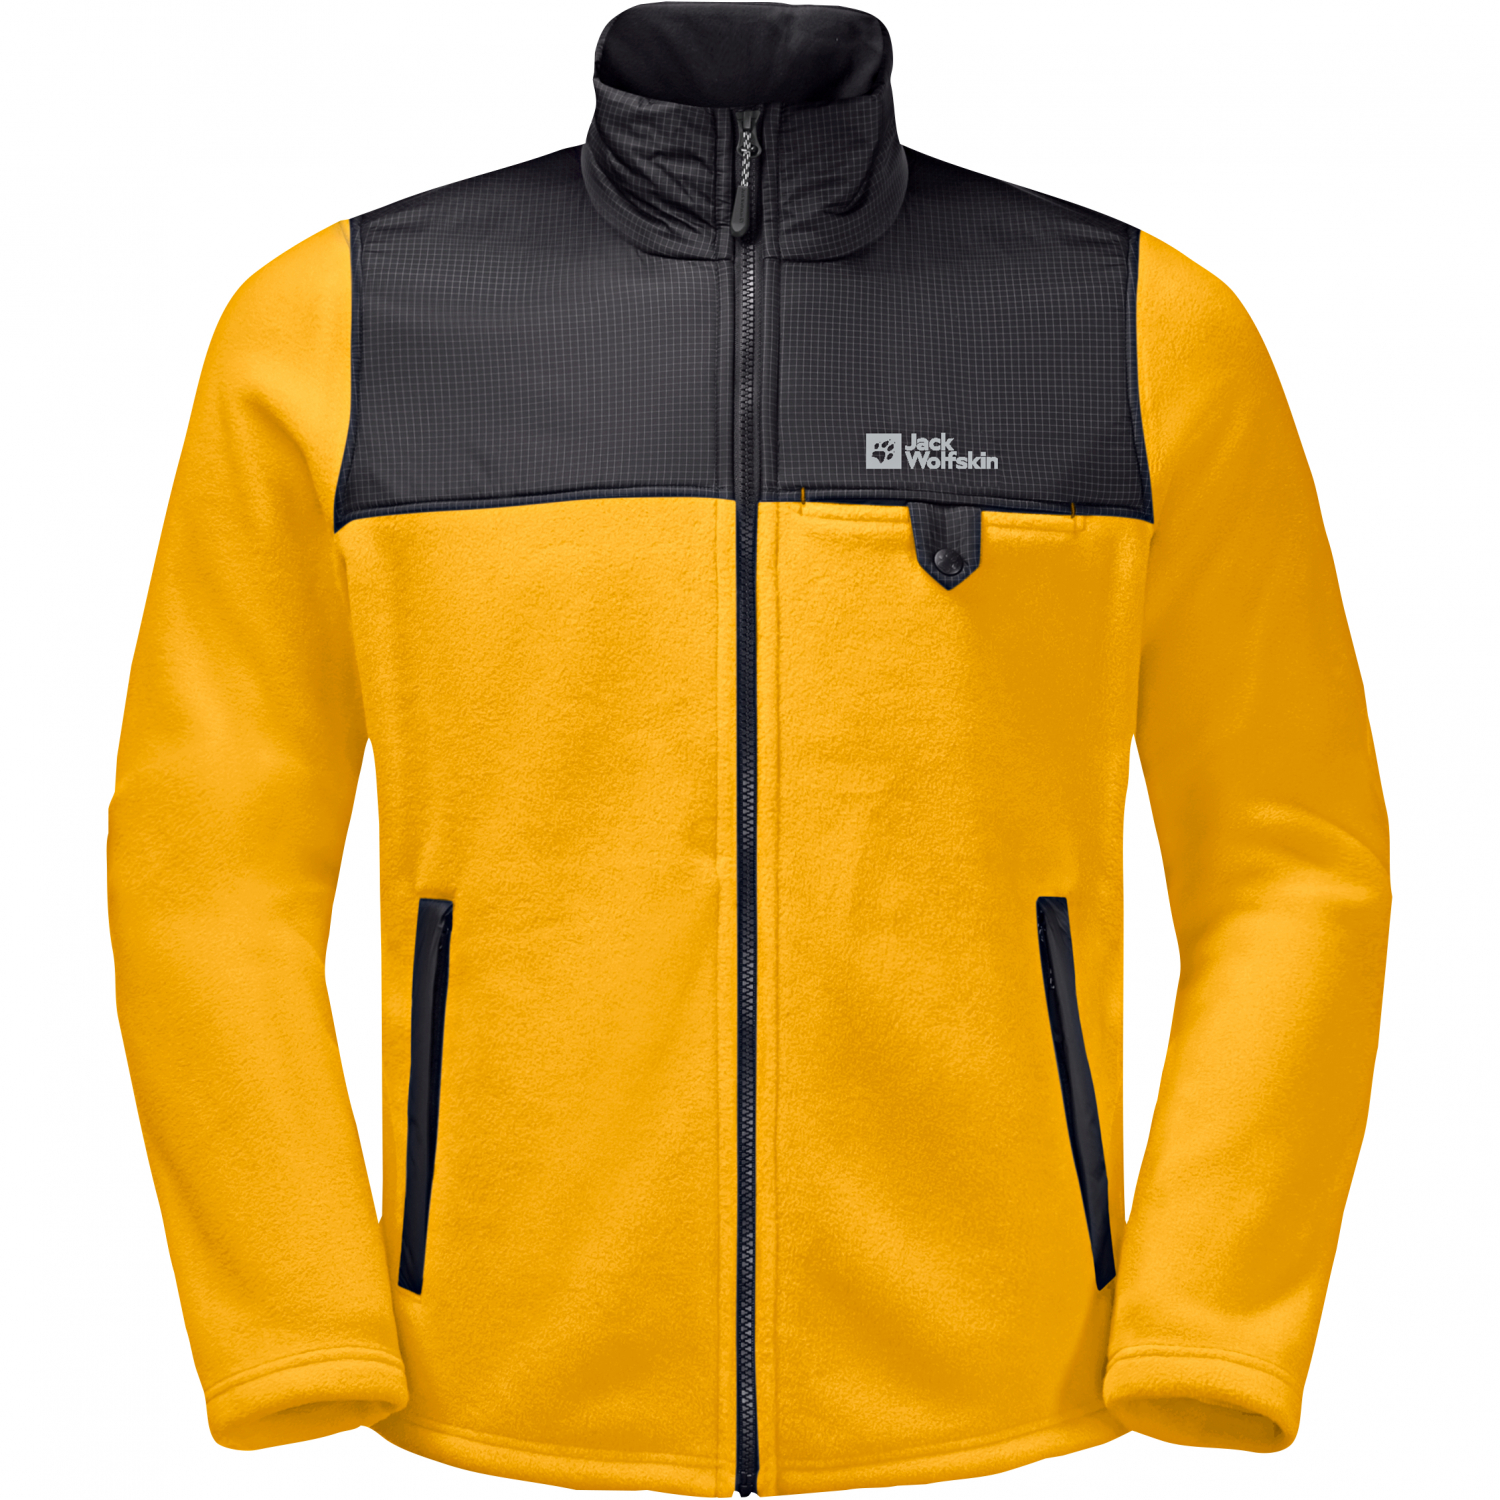 Jack Wolfskin Mens DNA Grizzly jacket at prices fleece Shop Askari low Fishing | (yellow/black)